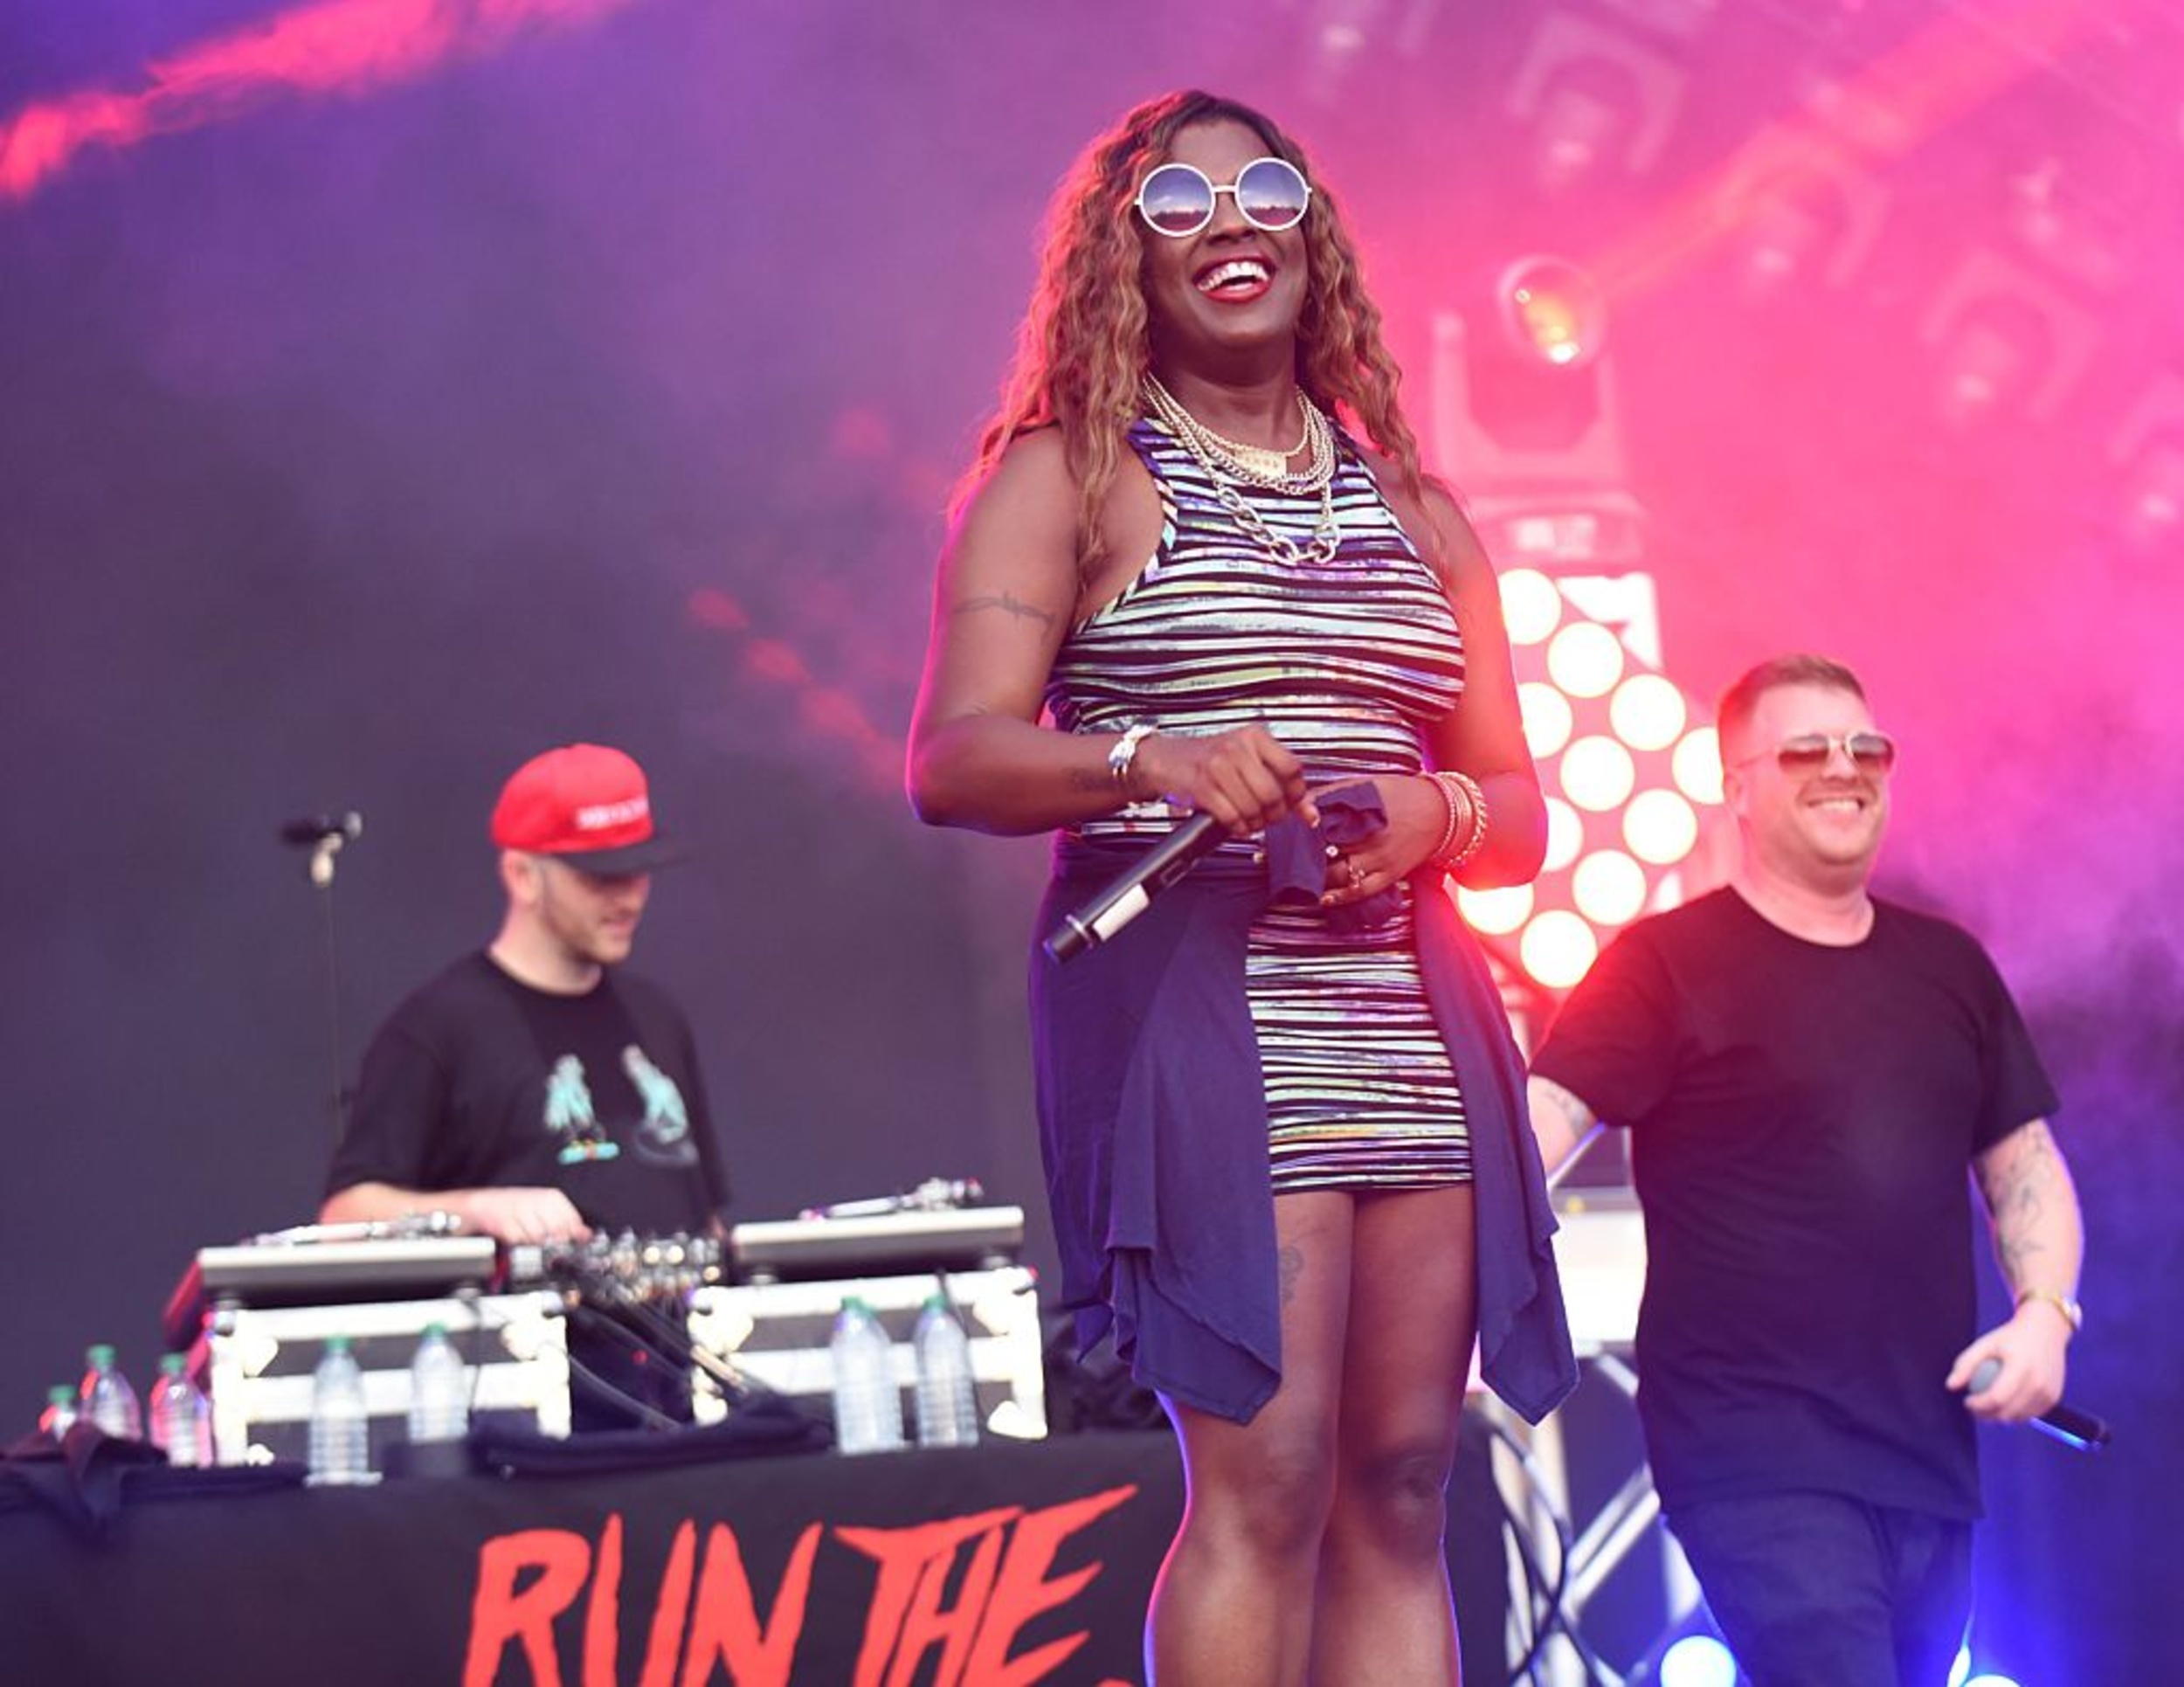 <p>In the early ‘90s, Gangsta Boo helped put Memphis on the map as a hip-hop hub, thanks to being a member of Three 6 Mafia. In 1998, Gangsta Boo released her solo debut album, <em>Enquiring Minds,</em> which featured the lead single “Where Dem Dollas At?” Her bold lyrical style influenced many artists of today, like Cardi B, Megan Thee Stallion, and GloRilla. </p><p><a href='https://www.msn.com/en-us/community/channel/vid-cj9pqbr0vn9in2b6ddcd8sfgpfq6x6utp44fssrv6mc2gtybw0us'>Follow us on MSN to see more of our exclusive entertainment content.</a></p>